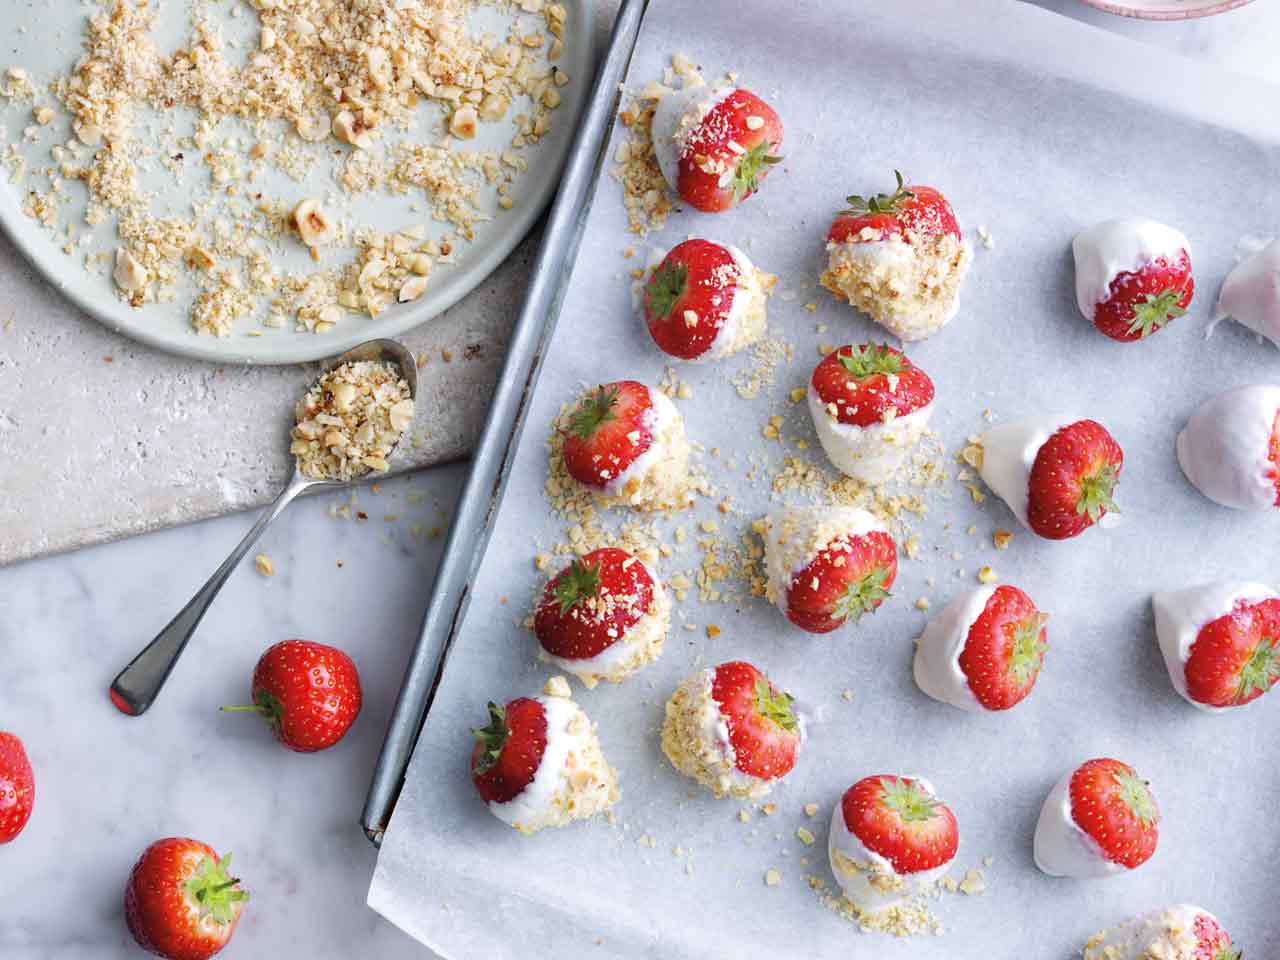 Strawberries dipped in yoghurt and hazelnuts